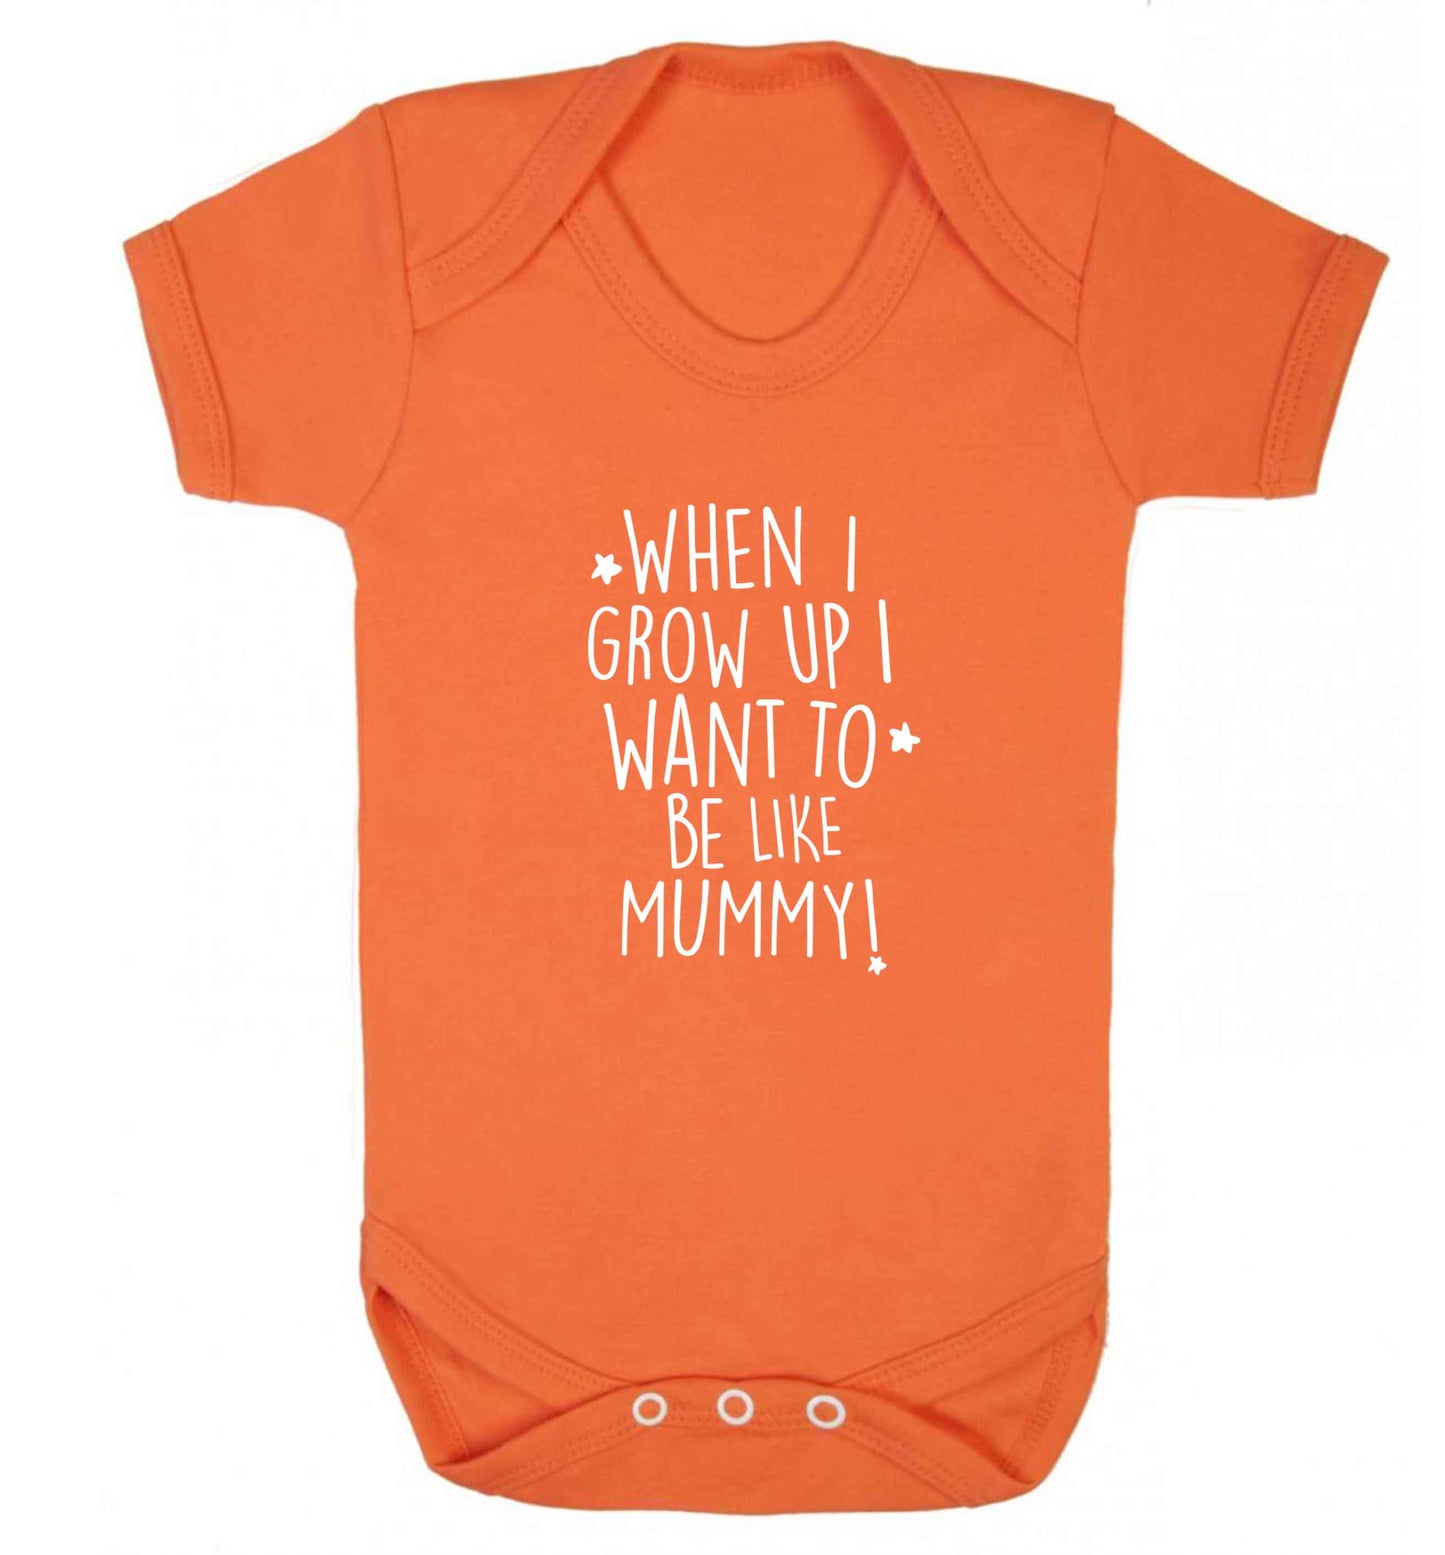 When I grow up I want to be like my mummy baby vest orange 18-24 months